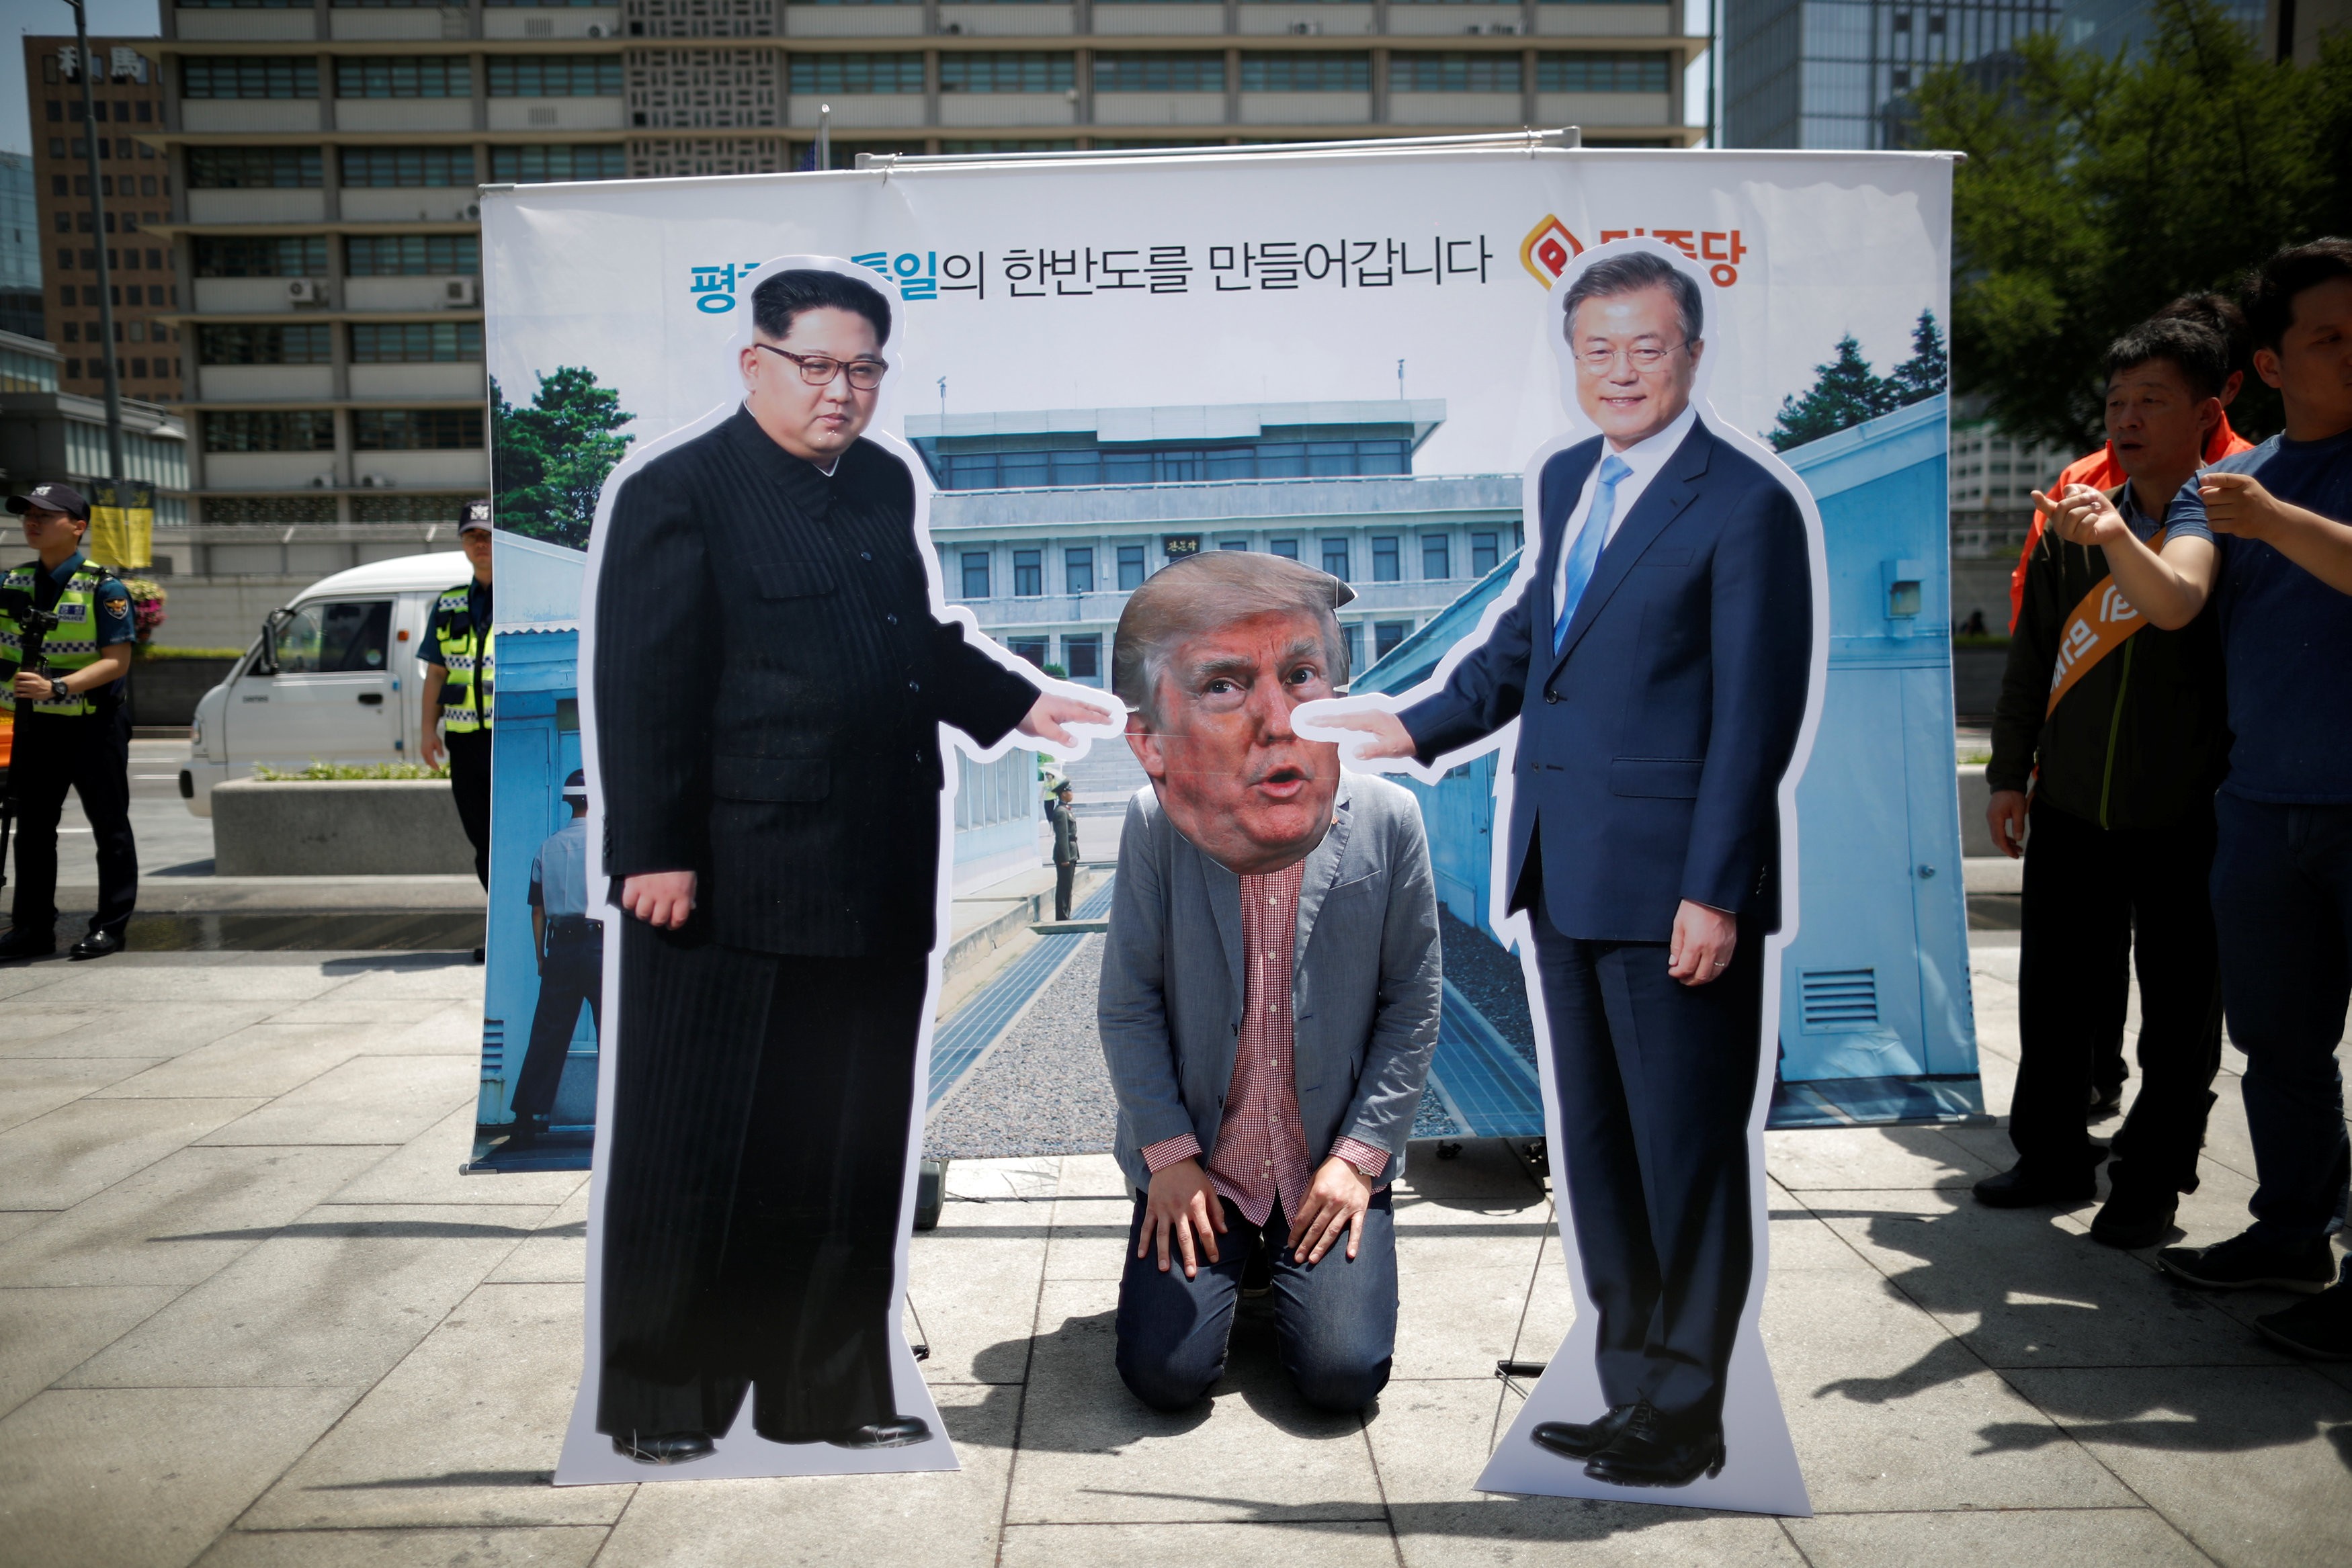 Koreans are sceptical – it’s been nearly 20 years since a Korean president last received the prize, and there is still hostility. Even so, this time there’s reason to believe that, in a strange way, it could contribute to a real lasting peace